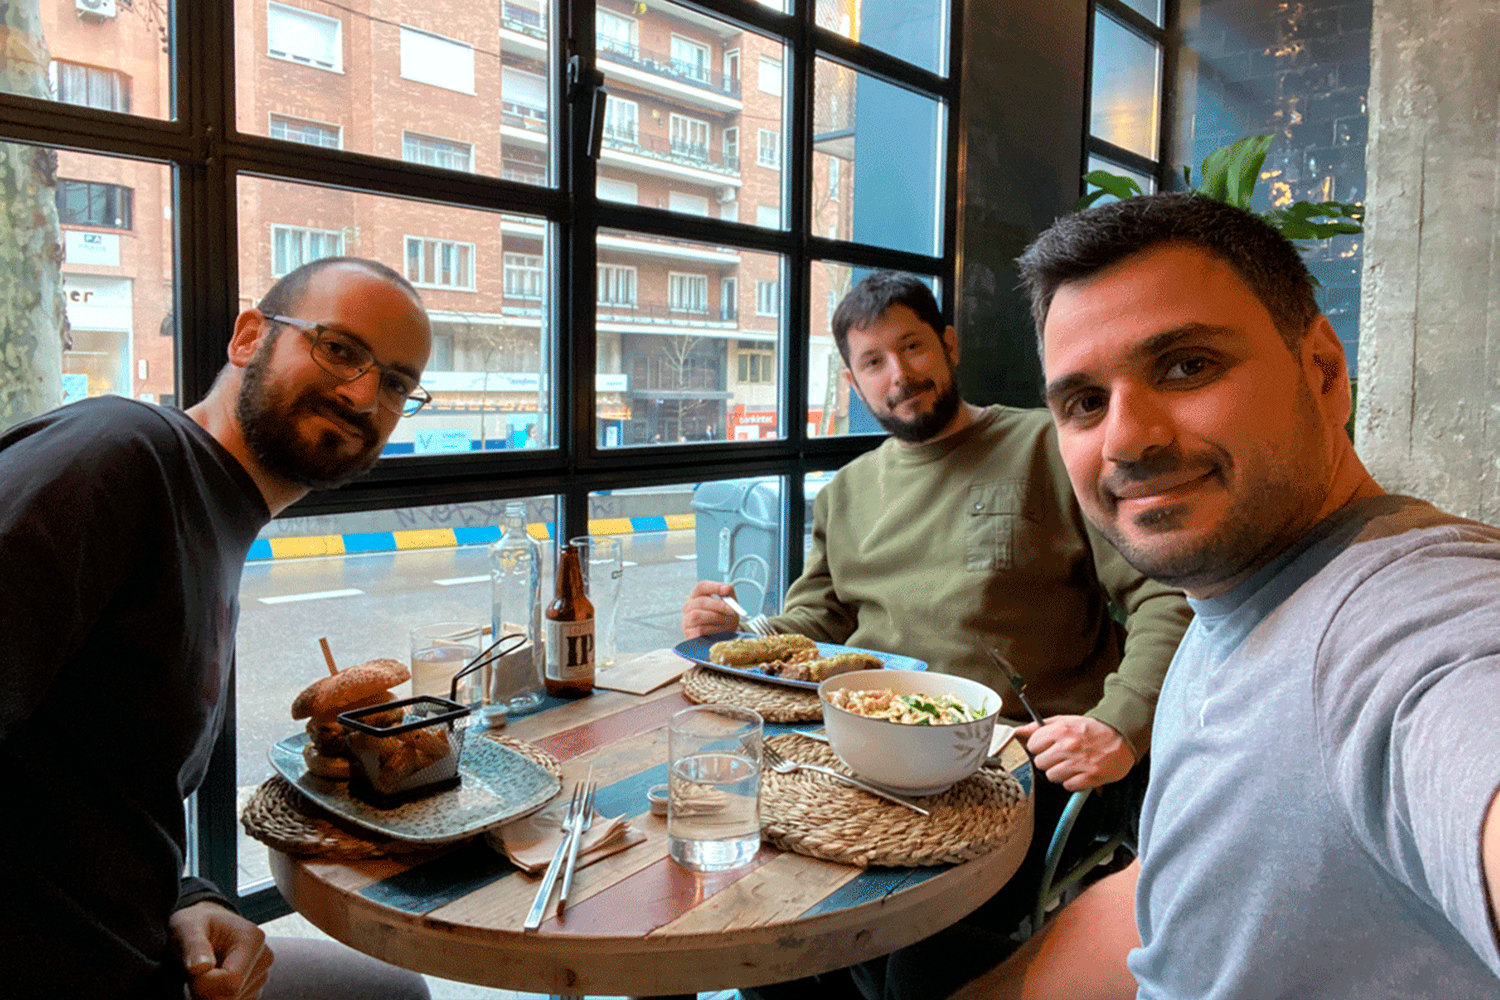 CoFounders of Stomio in a lunch